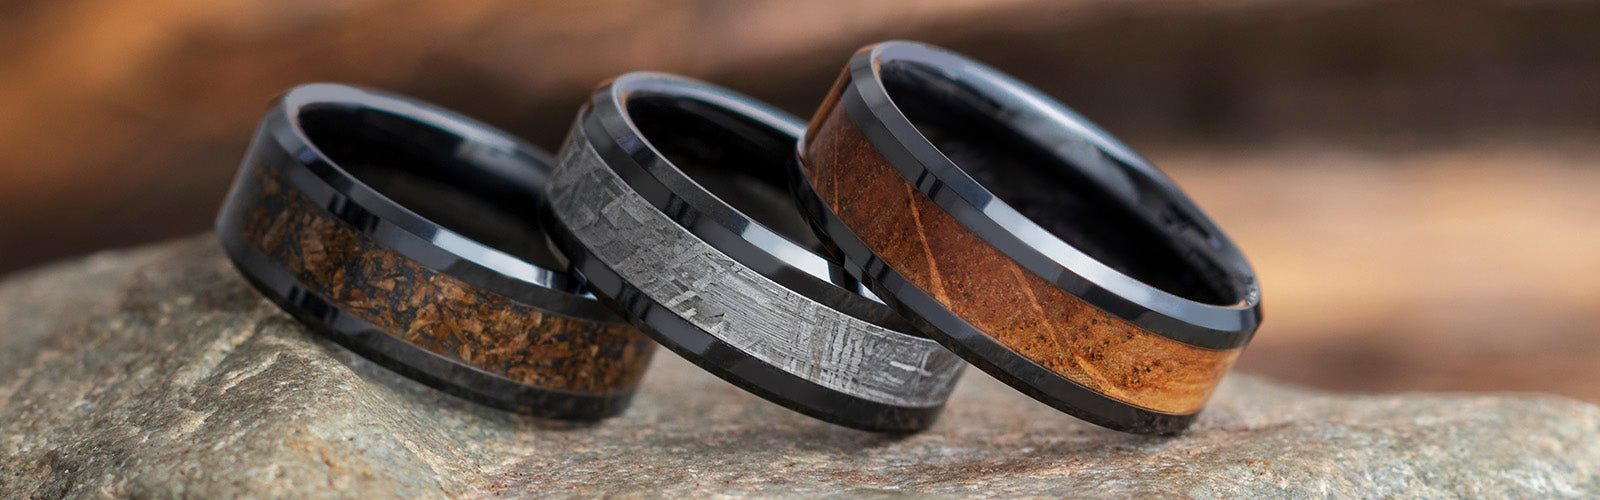 Single-Inlay Wedding Bands from Jewelry by Johan